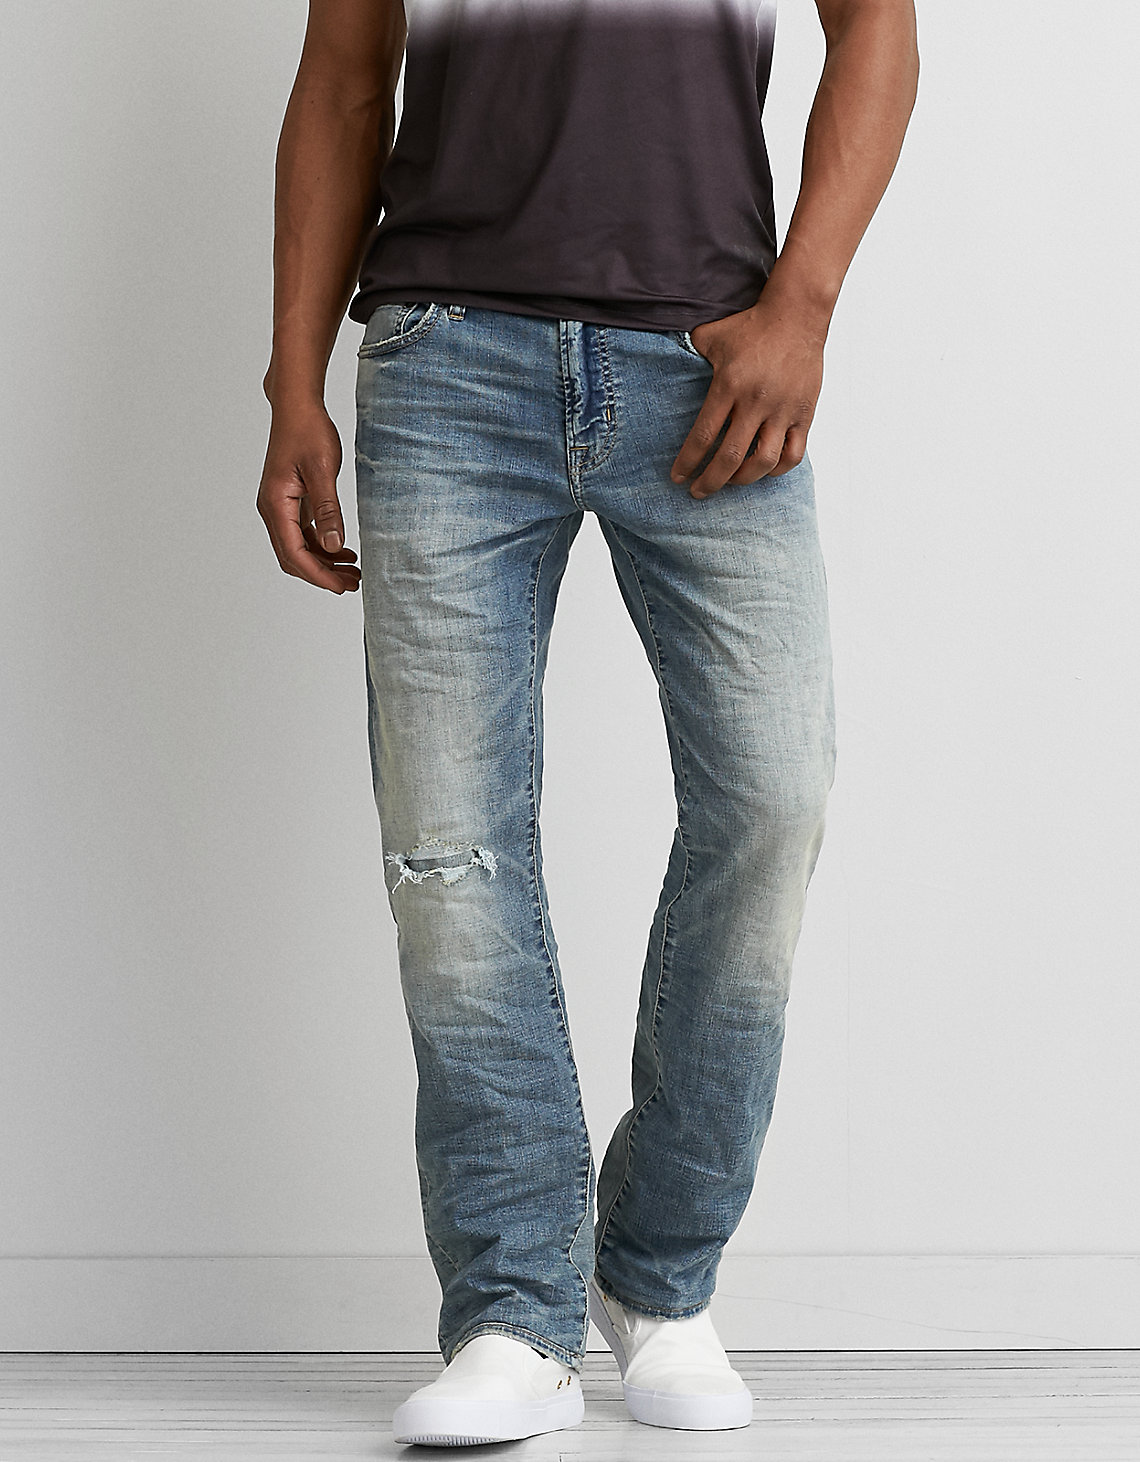 American Eagle Clearance – All Jeans Just $19.99! Free shipping!